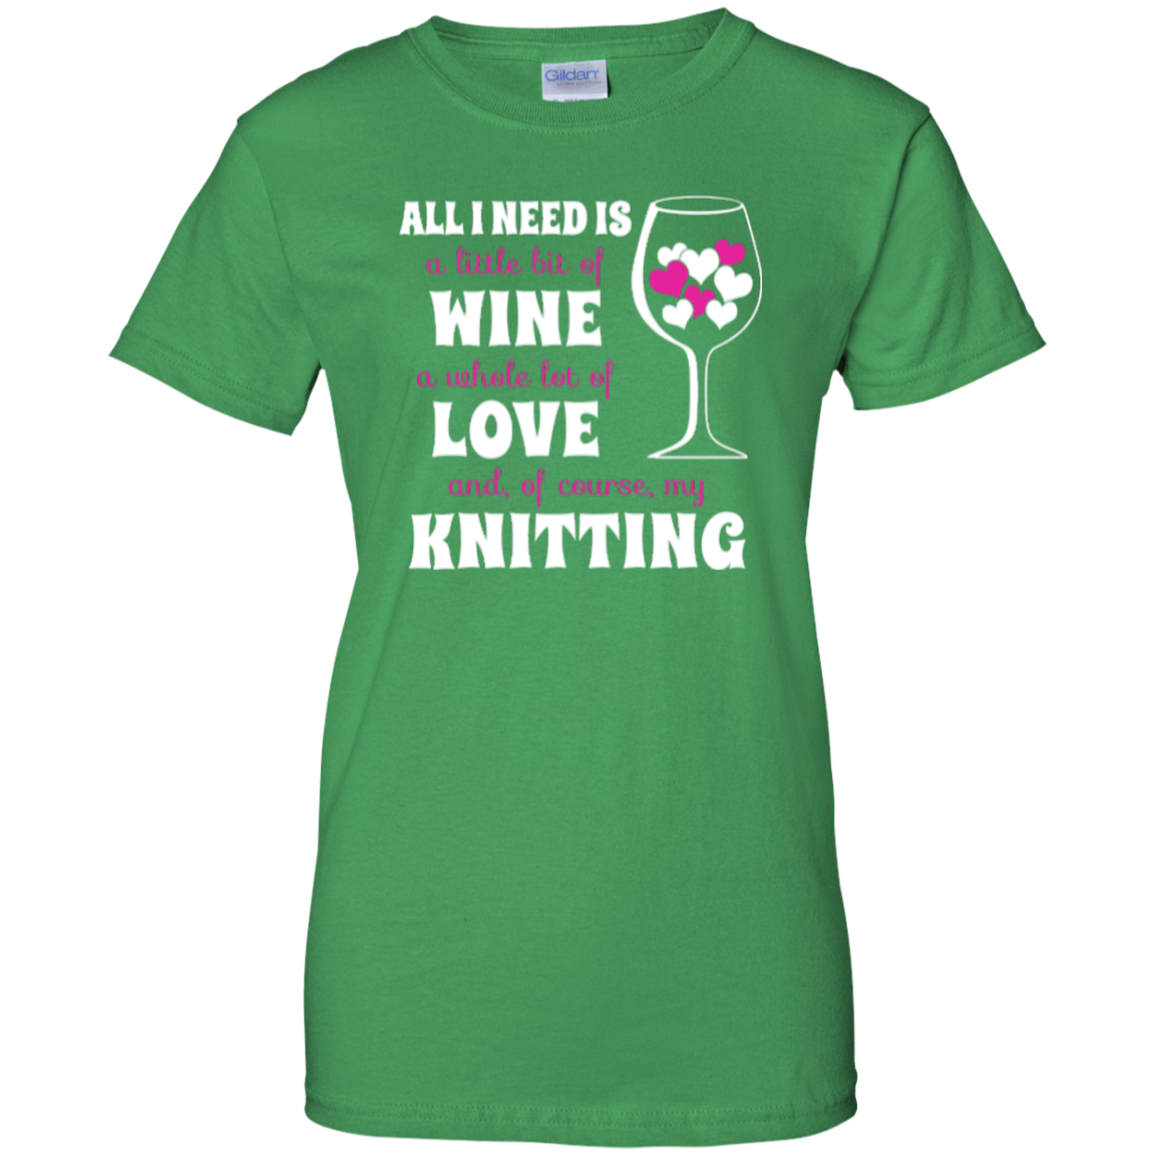 All I Need is Wine-Love-Knitting Ladies Custom 100% Cotton T-Shirt - Crafter4Life - 6